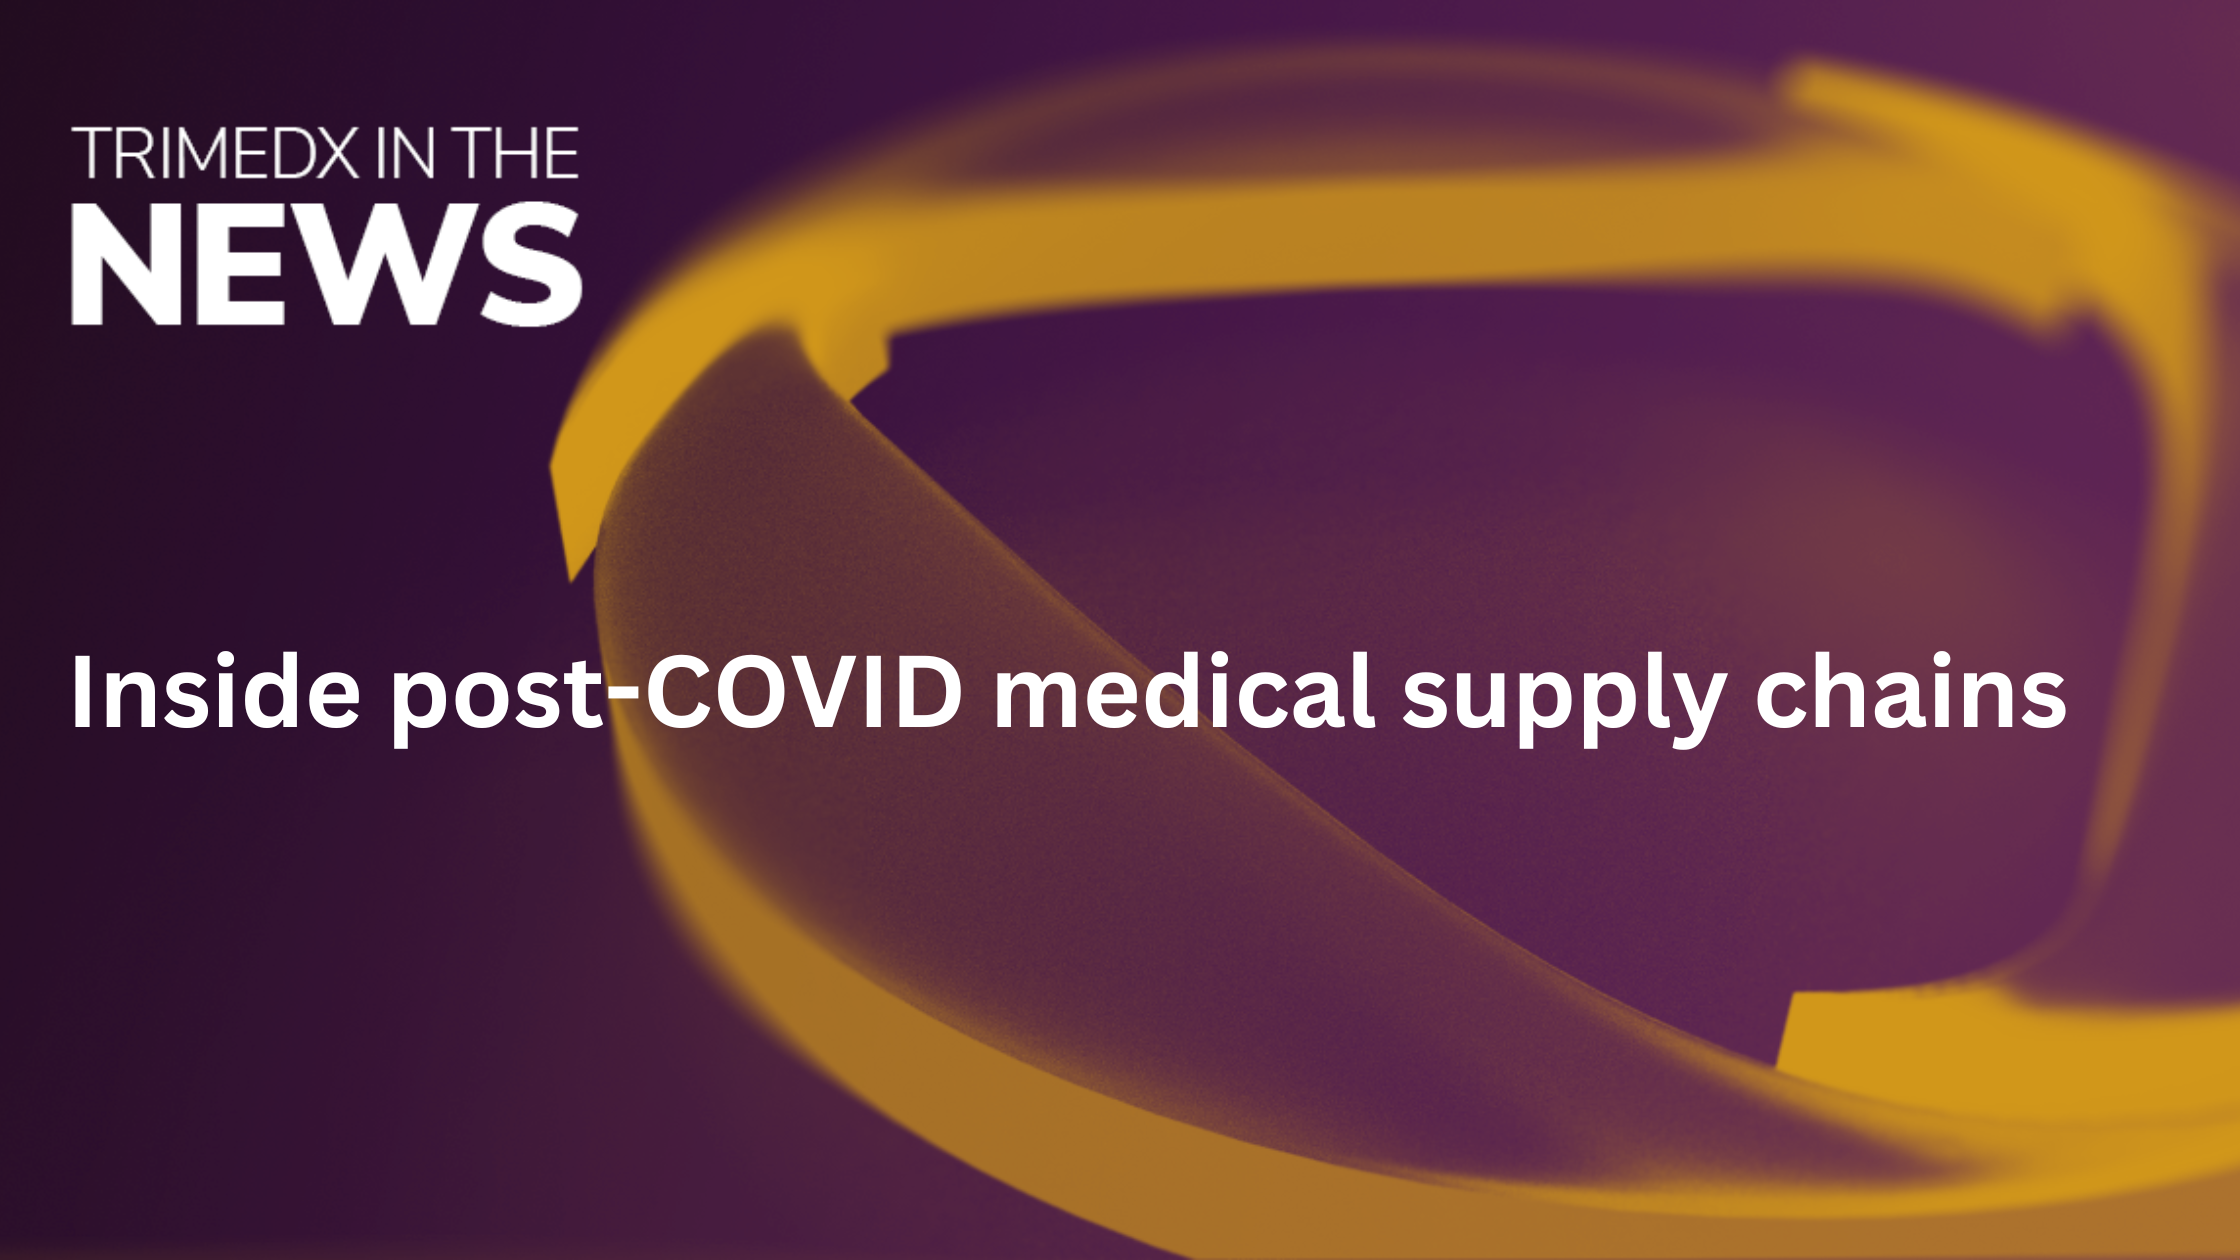 Inside post-COVID medical supply chains TRIMEDX In the News Graphic